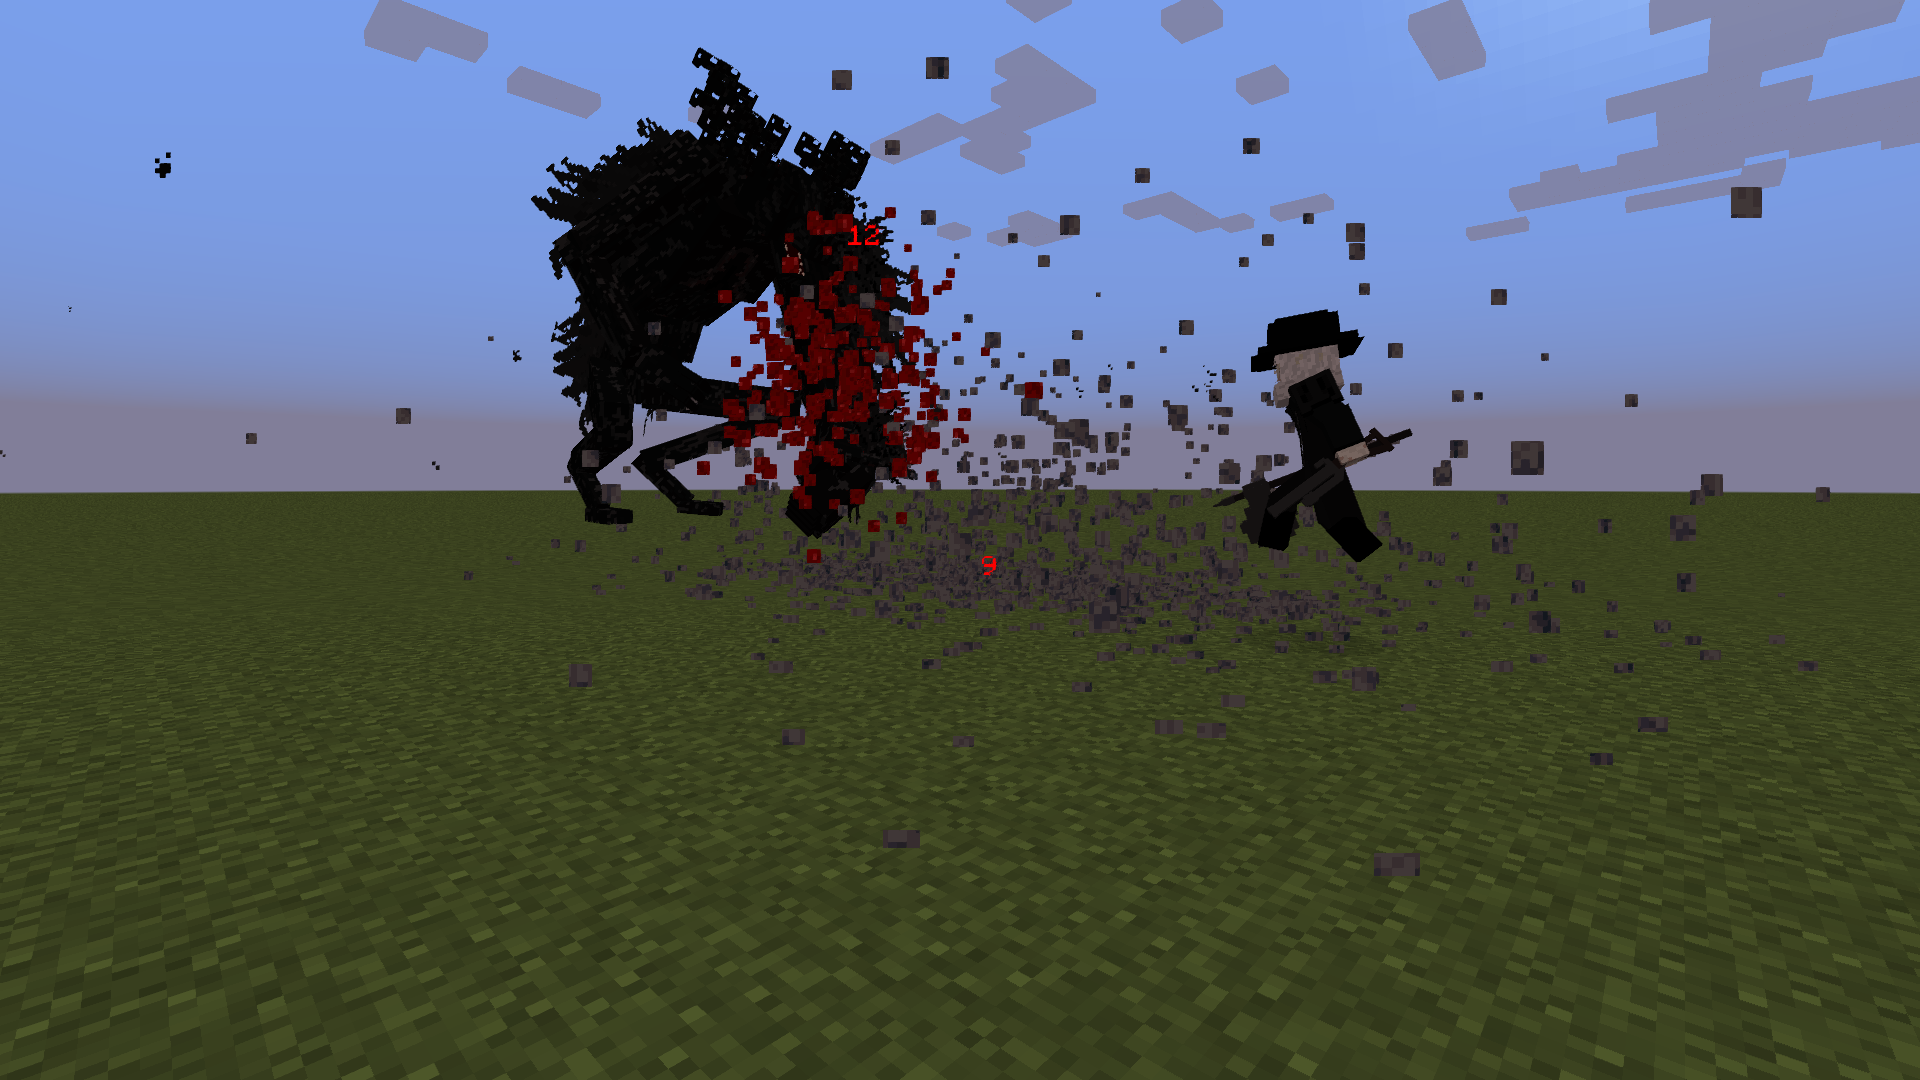 Wild blood minecraft. Blood and Madness 1.16.5. Blood and Madness 1.18.2. Blood and Madness мод на майнкрафт.